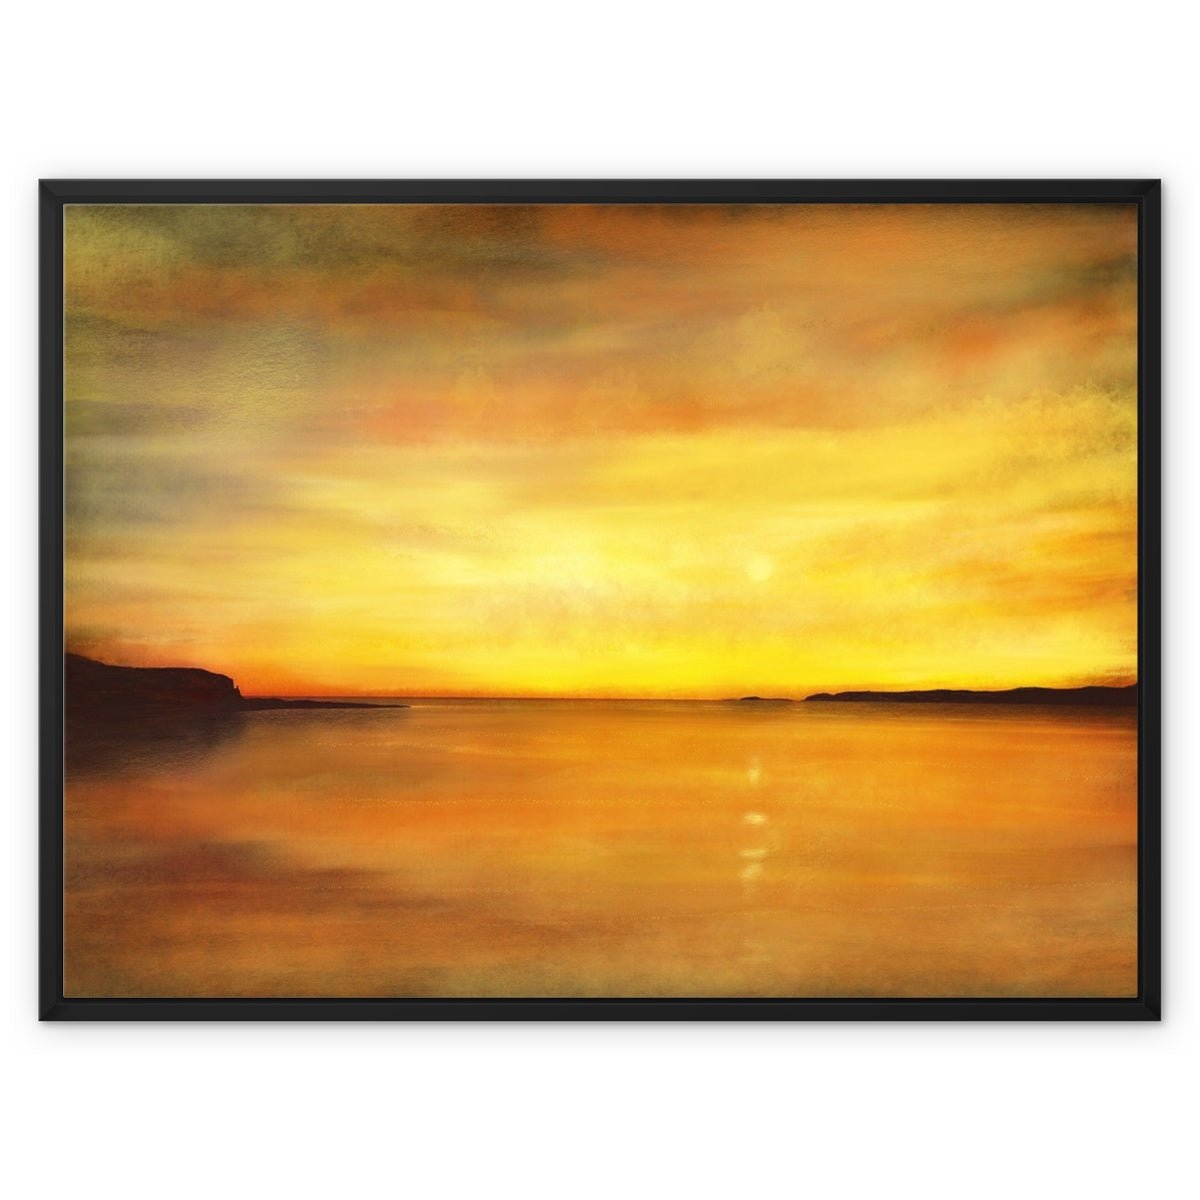 King's Cave Sunset Arran Painting | Framed Canvas From Scotland-Floating Framed Canvas Prints-Arran Art Gallery-32"x24"-Black Frame-Paintings, Prints, Homeware, Art Gifts From Scotland By Scottish Artist Kevin Hunter